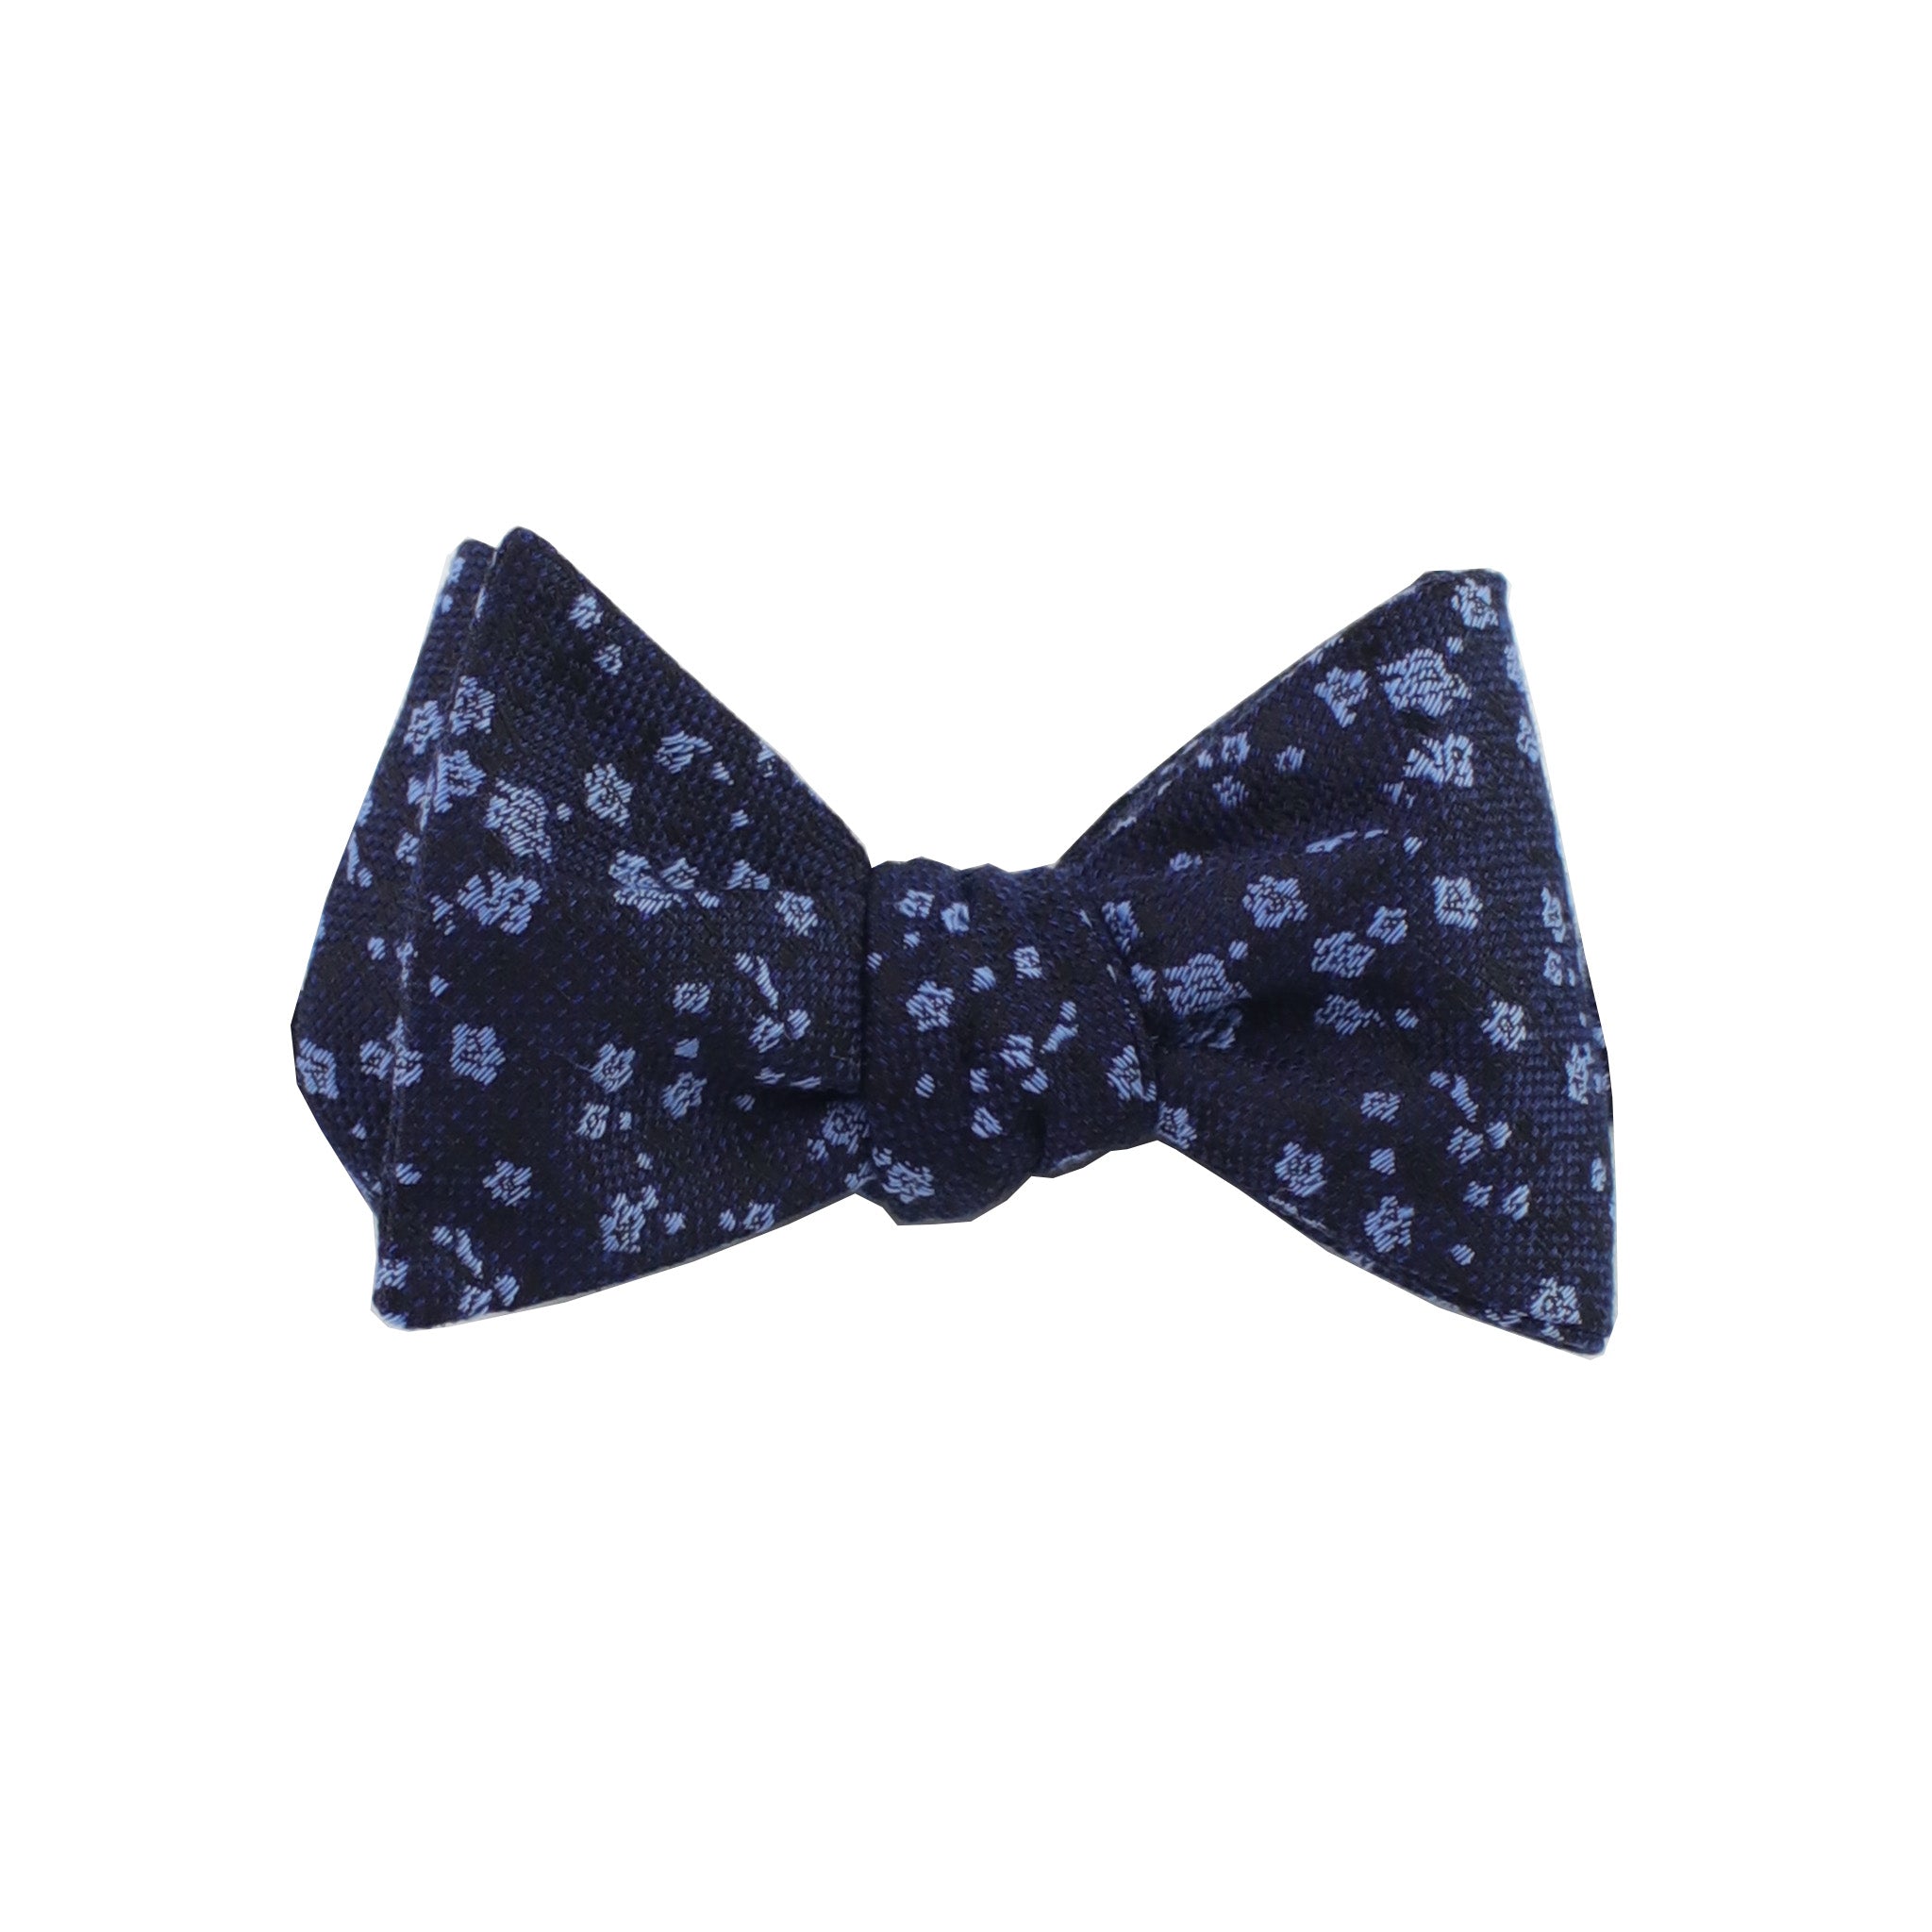 Navy & Light Blue Floral Self Tie Bow Tie from DIBI